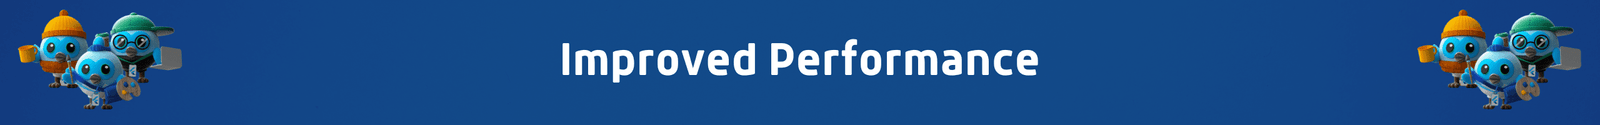 Improved Performance